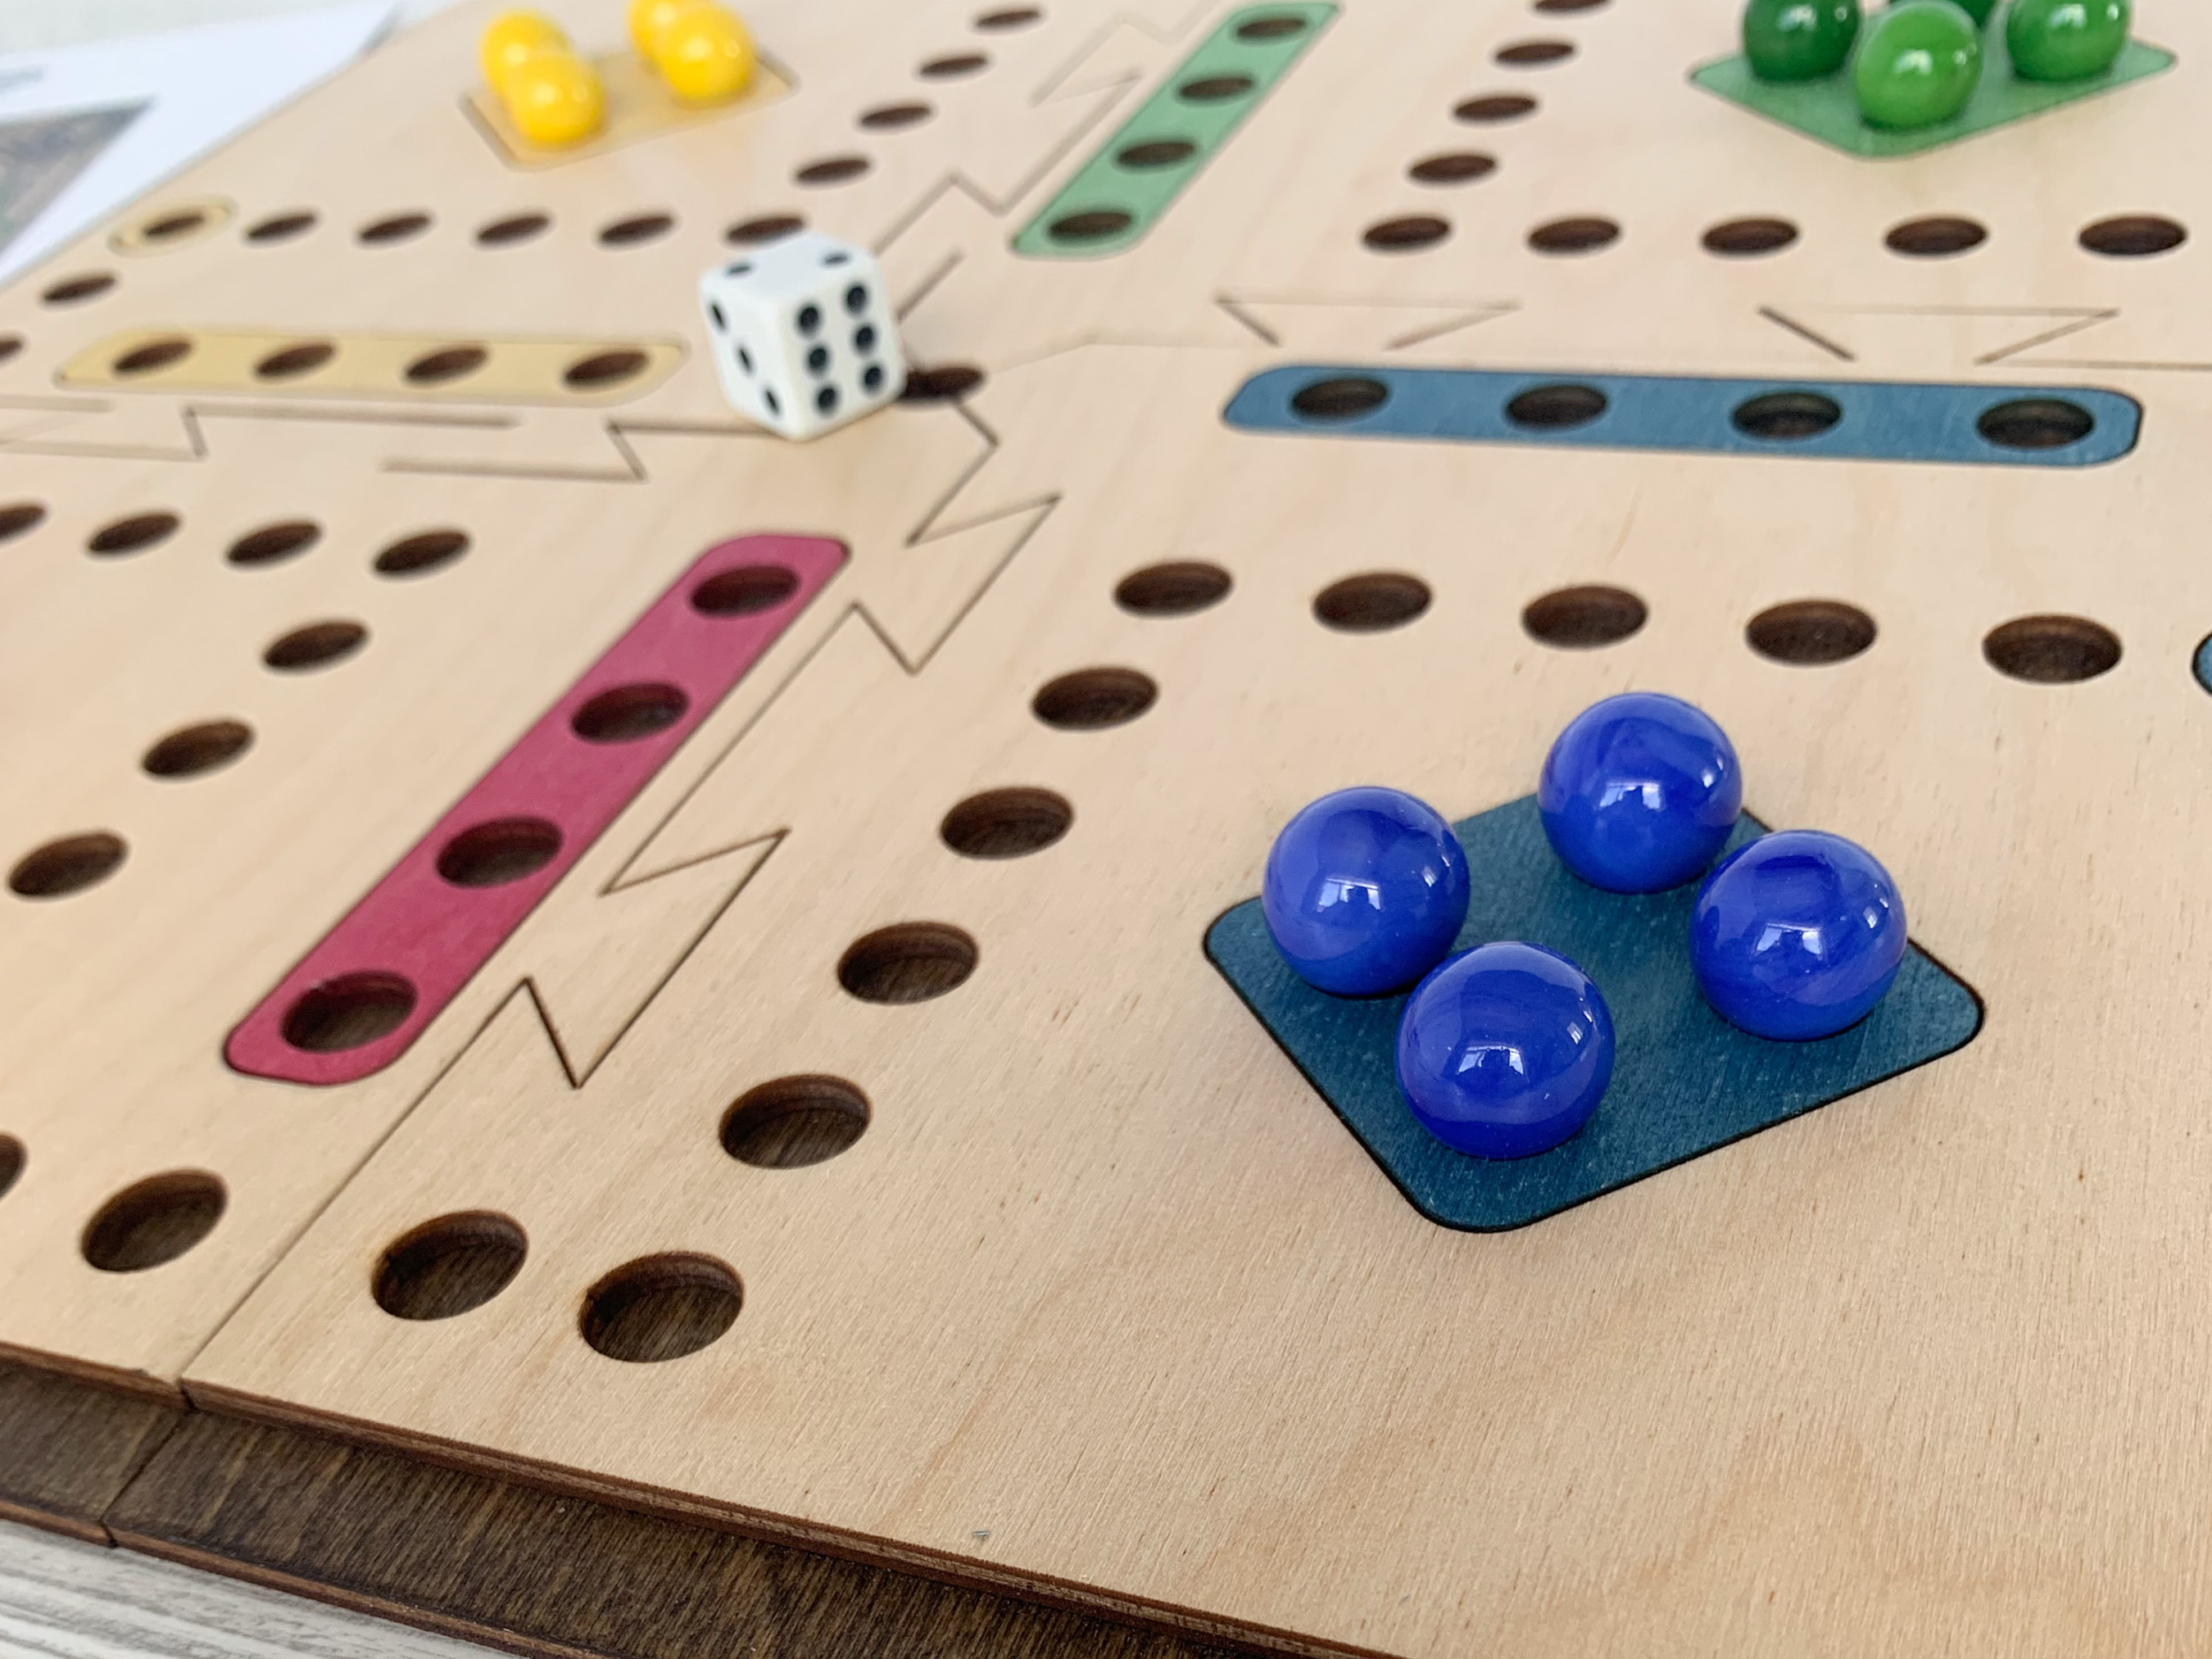 Aggravation Travel 4 player wooden board game